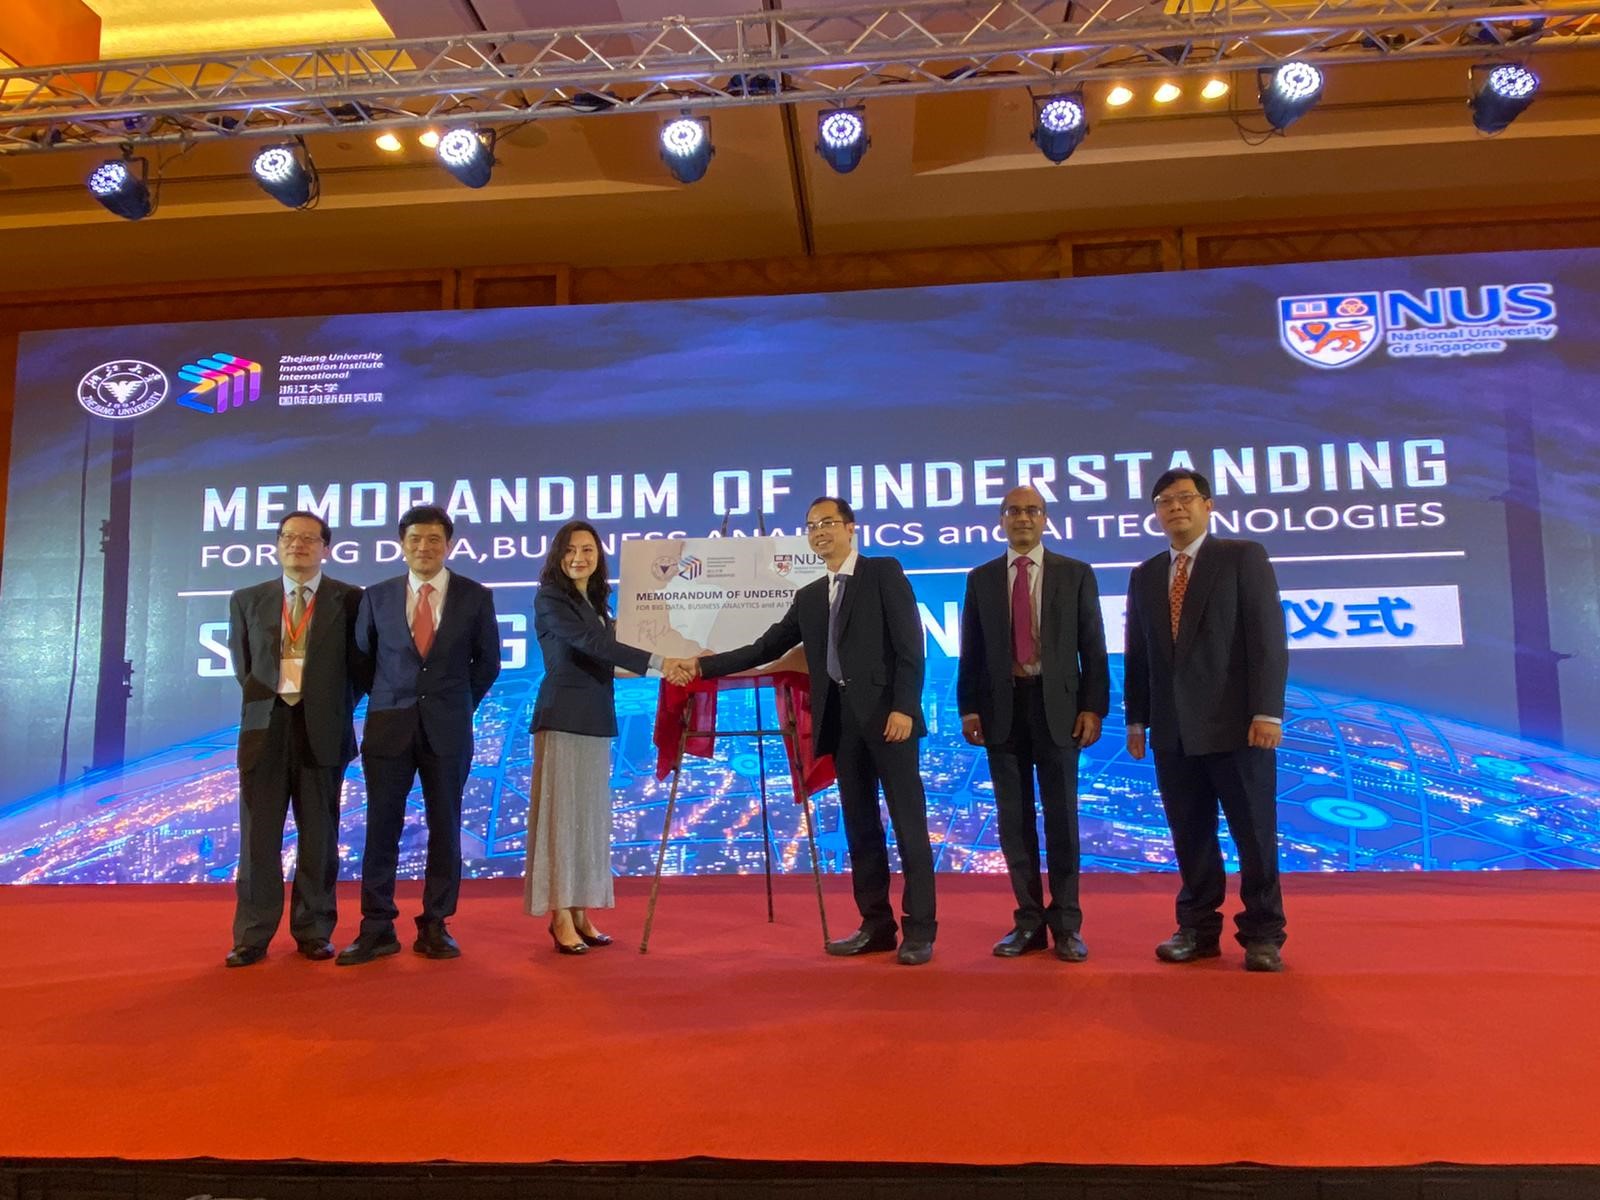 Left to right: <br>
Mr Chen Xiaofeng, Deputy Dean of Zhejiang University Innovation and Entrepreneurship Institute, <br>
Dr Matthew Wang Yang, Executive Dean of ZIII, <br>
Ms Tao Hong, Executive Dean of ZIII, <br>
Associate Professor James Pang, Co-Director of NUS BAC, <br>
Professor Mohan Kankanhalli, Dean and Provost’s Chair at NUS Computing, Provost’s Chair, <br>
Professor Melvyn Sim, Professor and Provost's Chair at the Department of Analytics & Operations, NUS Business School 